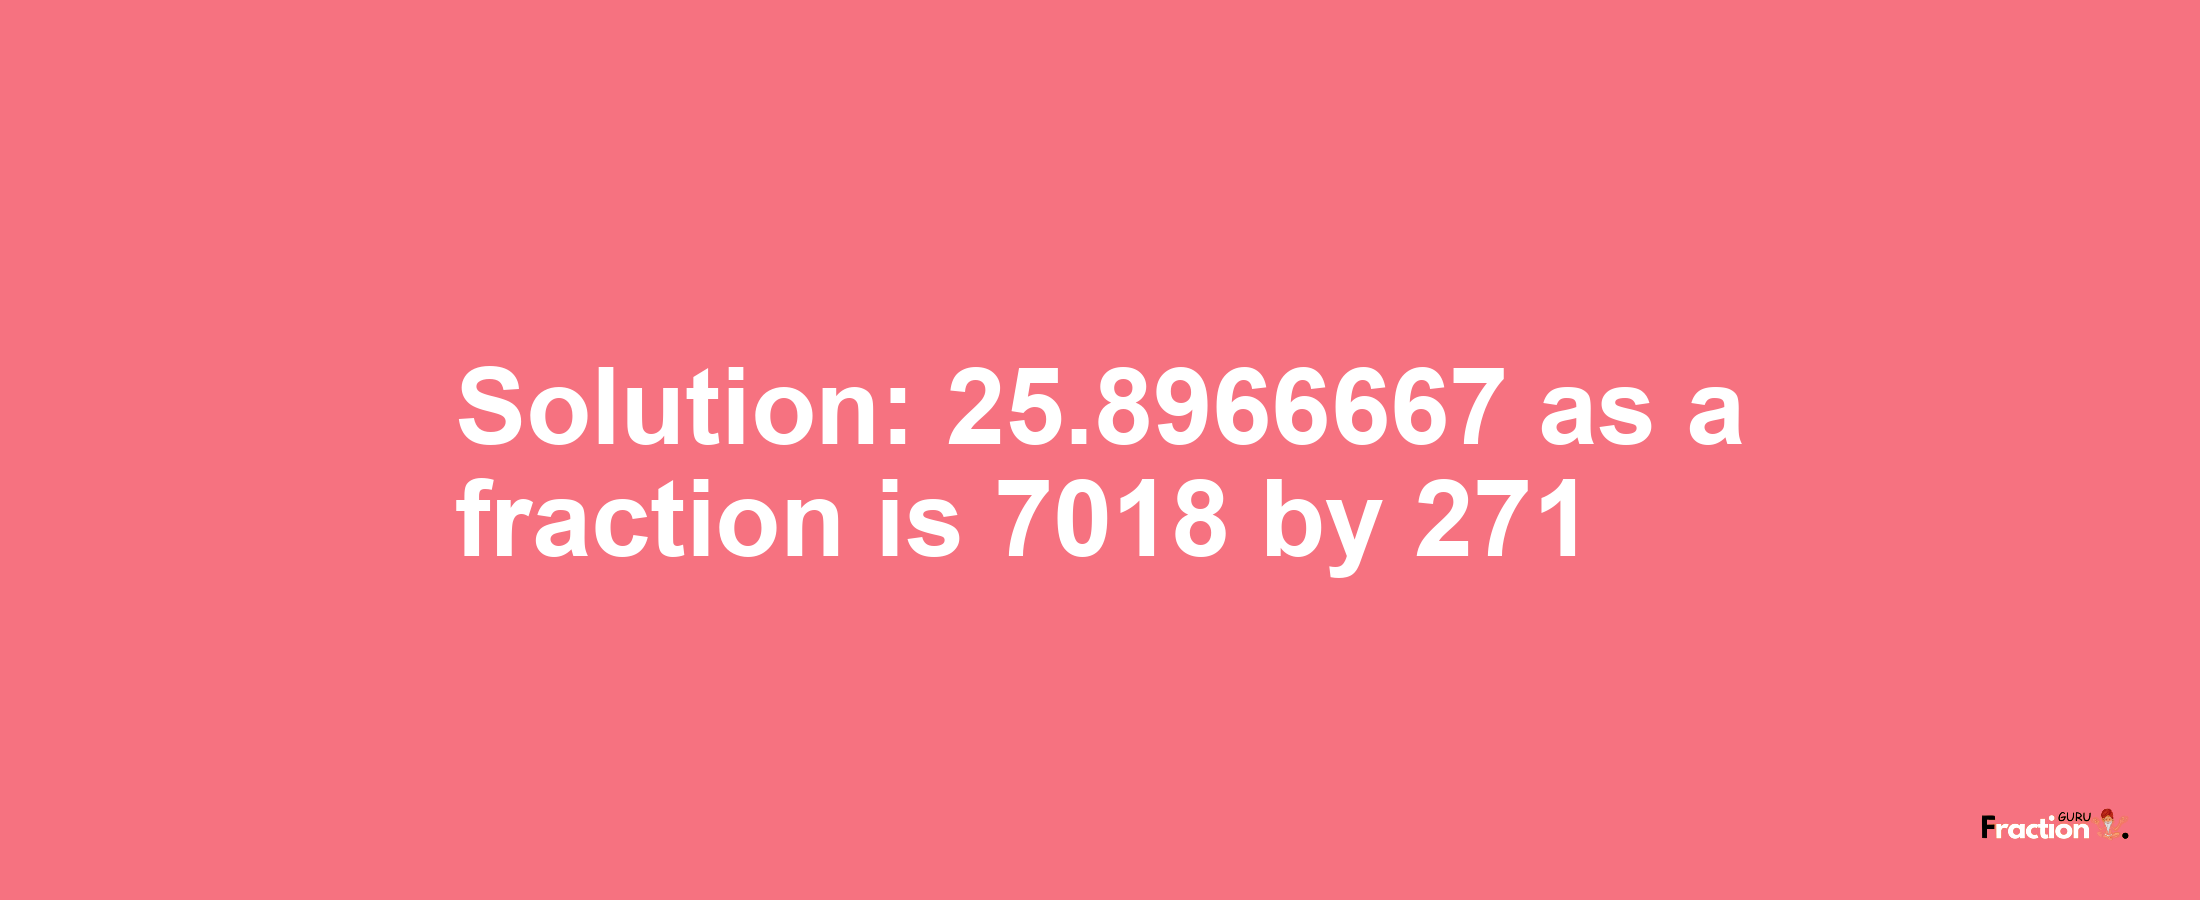 Solution:25.8966667 as a fraction is 7018/271